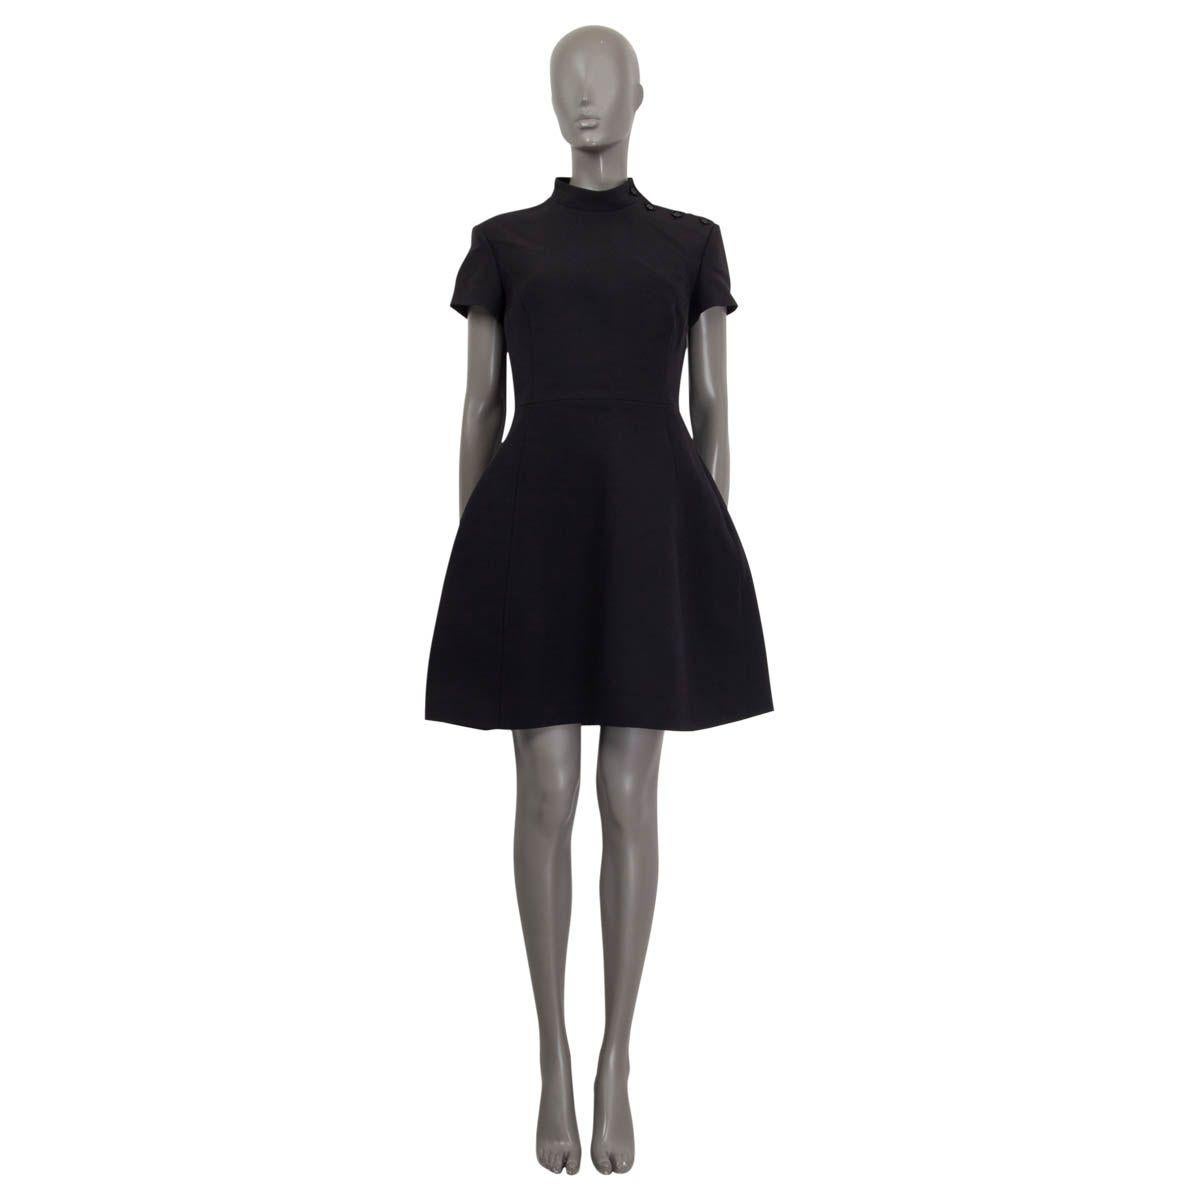 100% authentic Louis Vuitton a-line dress in black wool (64%) and silk (36%). Features short sleeves and a high neck. Opens with zipper on the back and four buttons on the shoulder. Lined in black silk (100%). Has been worn and is in excellent